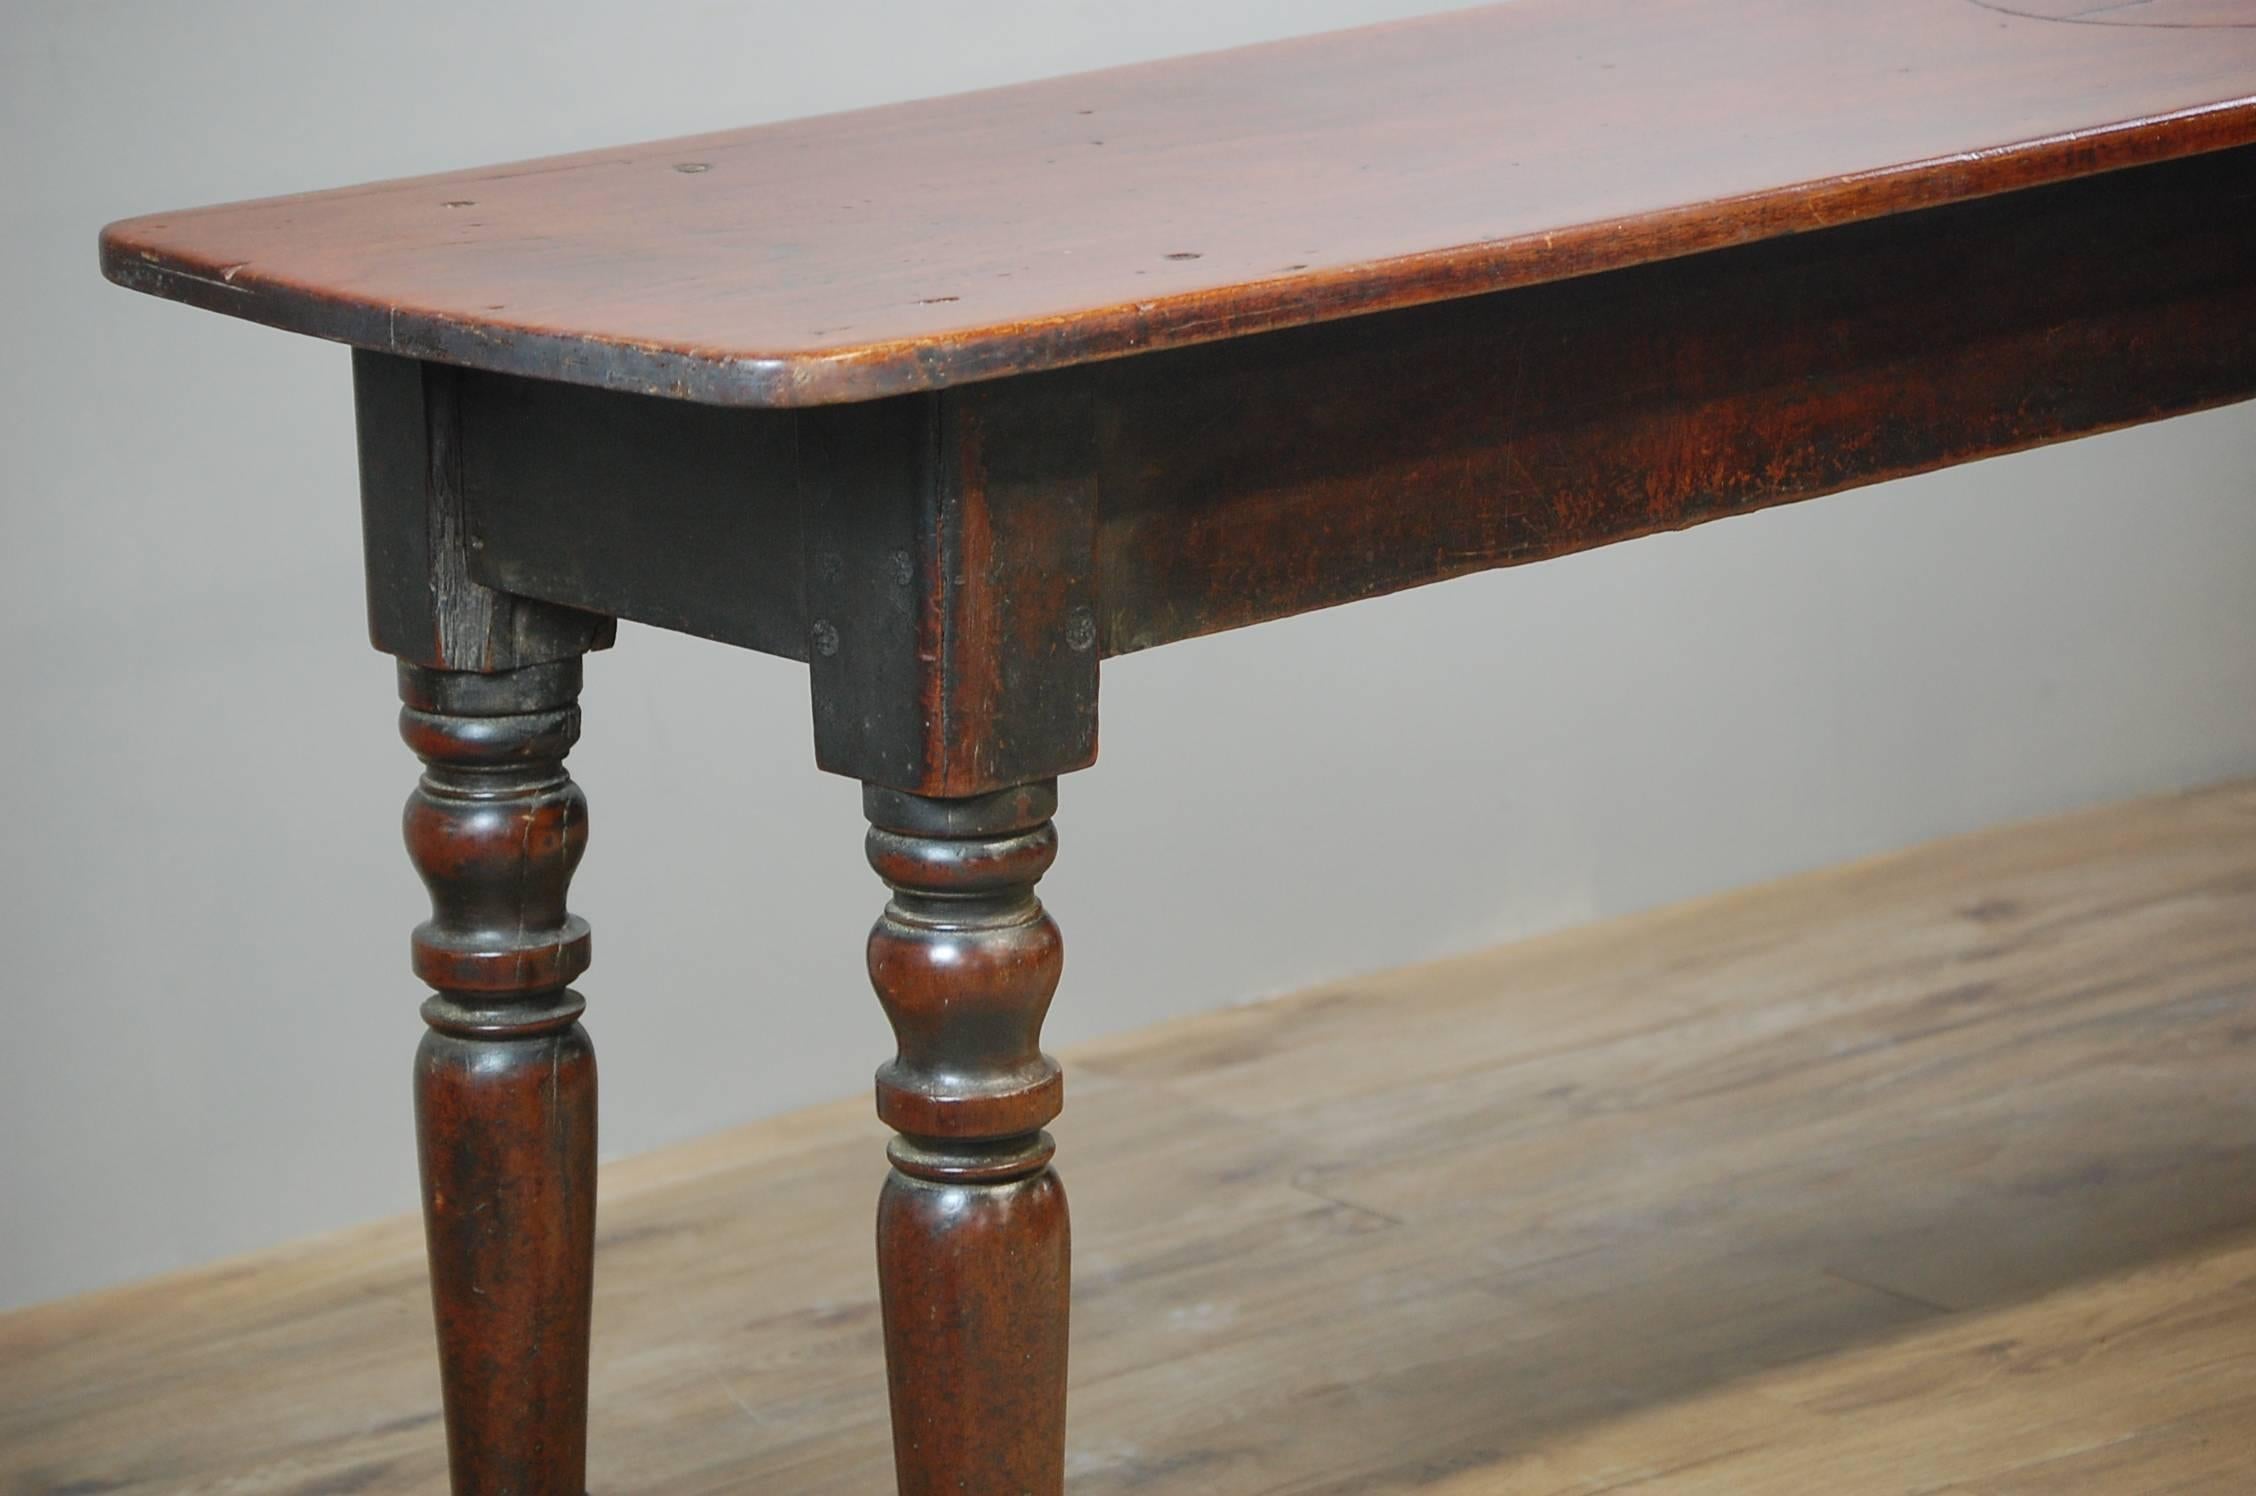 19th century English serving table, with naïve scratch carved tavern games table surface. Wonderful patina, untouched and baring scars of tavern life. Believed to be a type of unusual shove ha'penny style game. One old split to the table surface